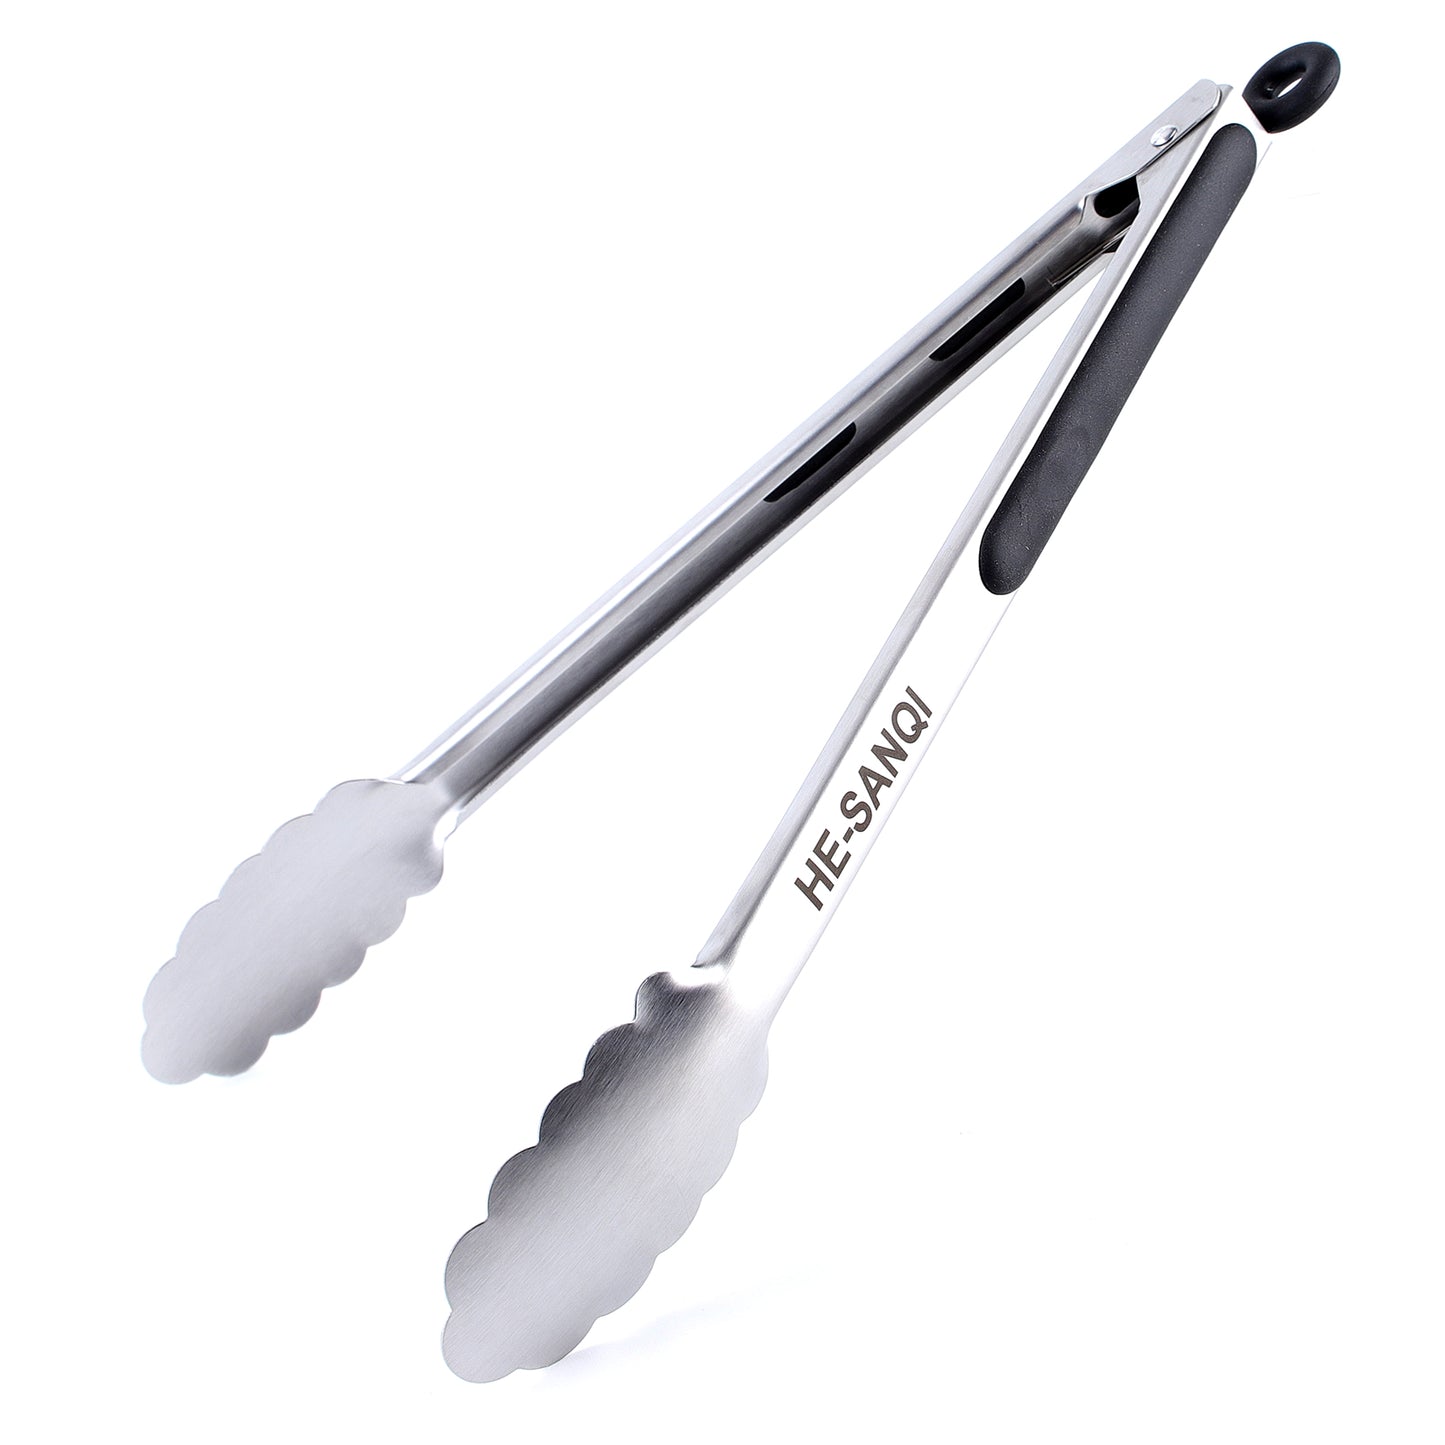 Walfos Food Grade Stainless Steel Kitchen Tongs for Cooking,BBQ